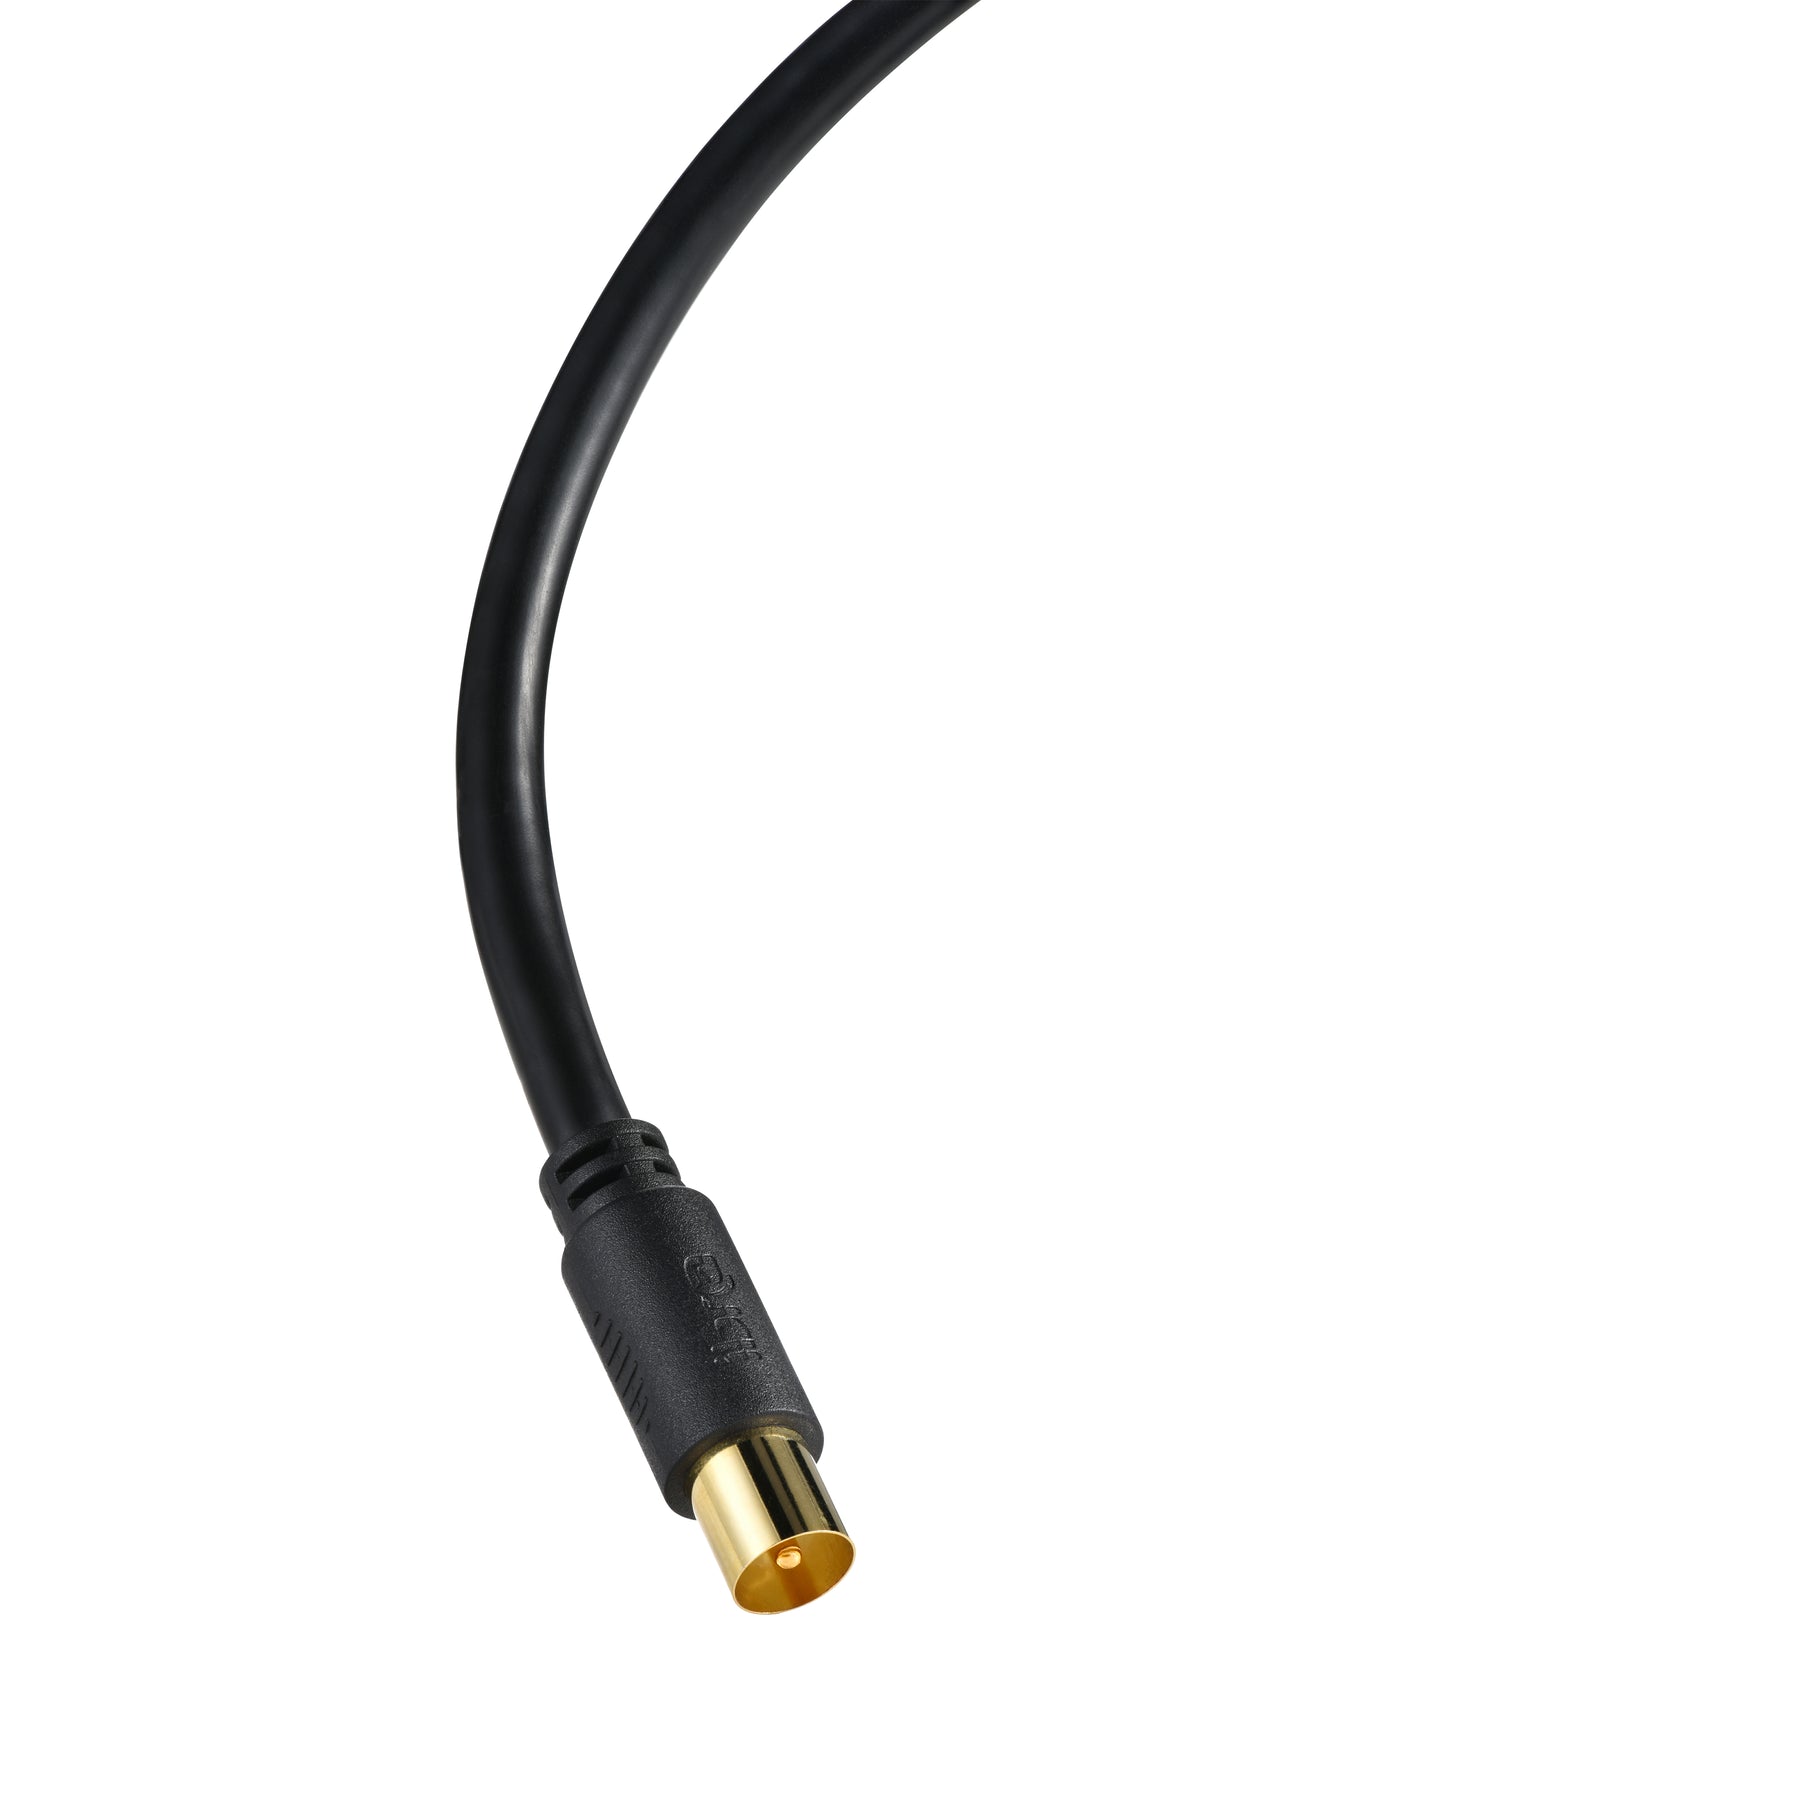 IBRA Aerial Coaxial Cable 0.5M with Gold-Plated Connectors, Male to Male RF Coax Lead with Female Adapter Coupler for Freeview, Freesat, Sky, Virgin, BT, You View, Satellite TV - Black